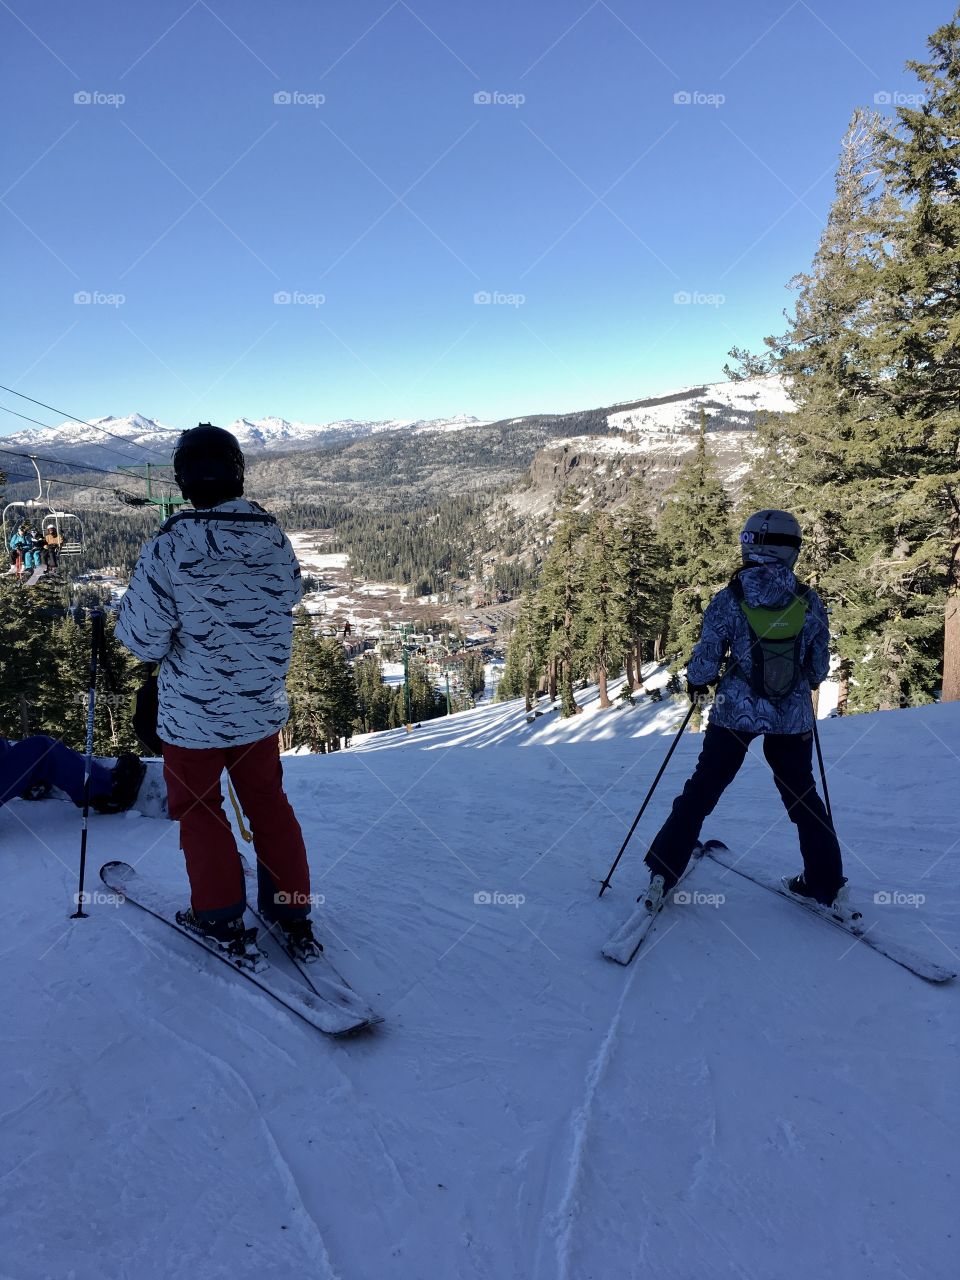 Two skiers at the top of a snow covered slope